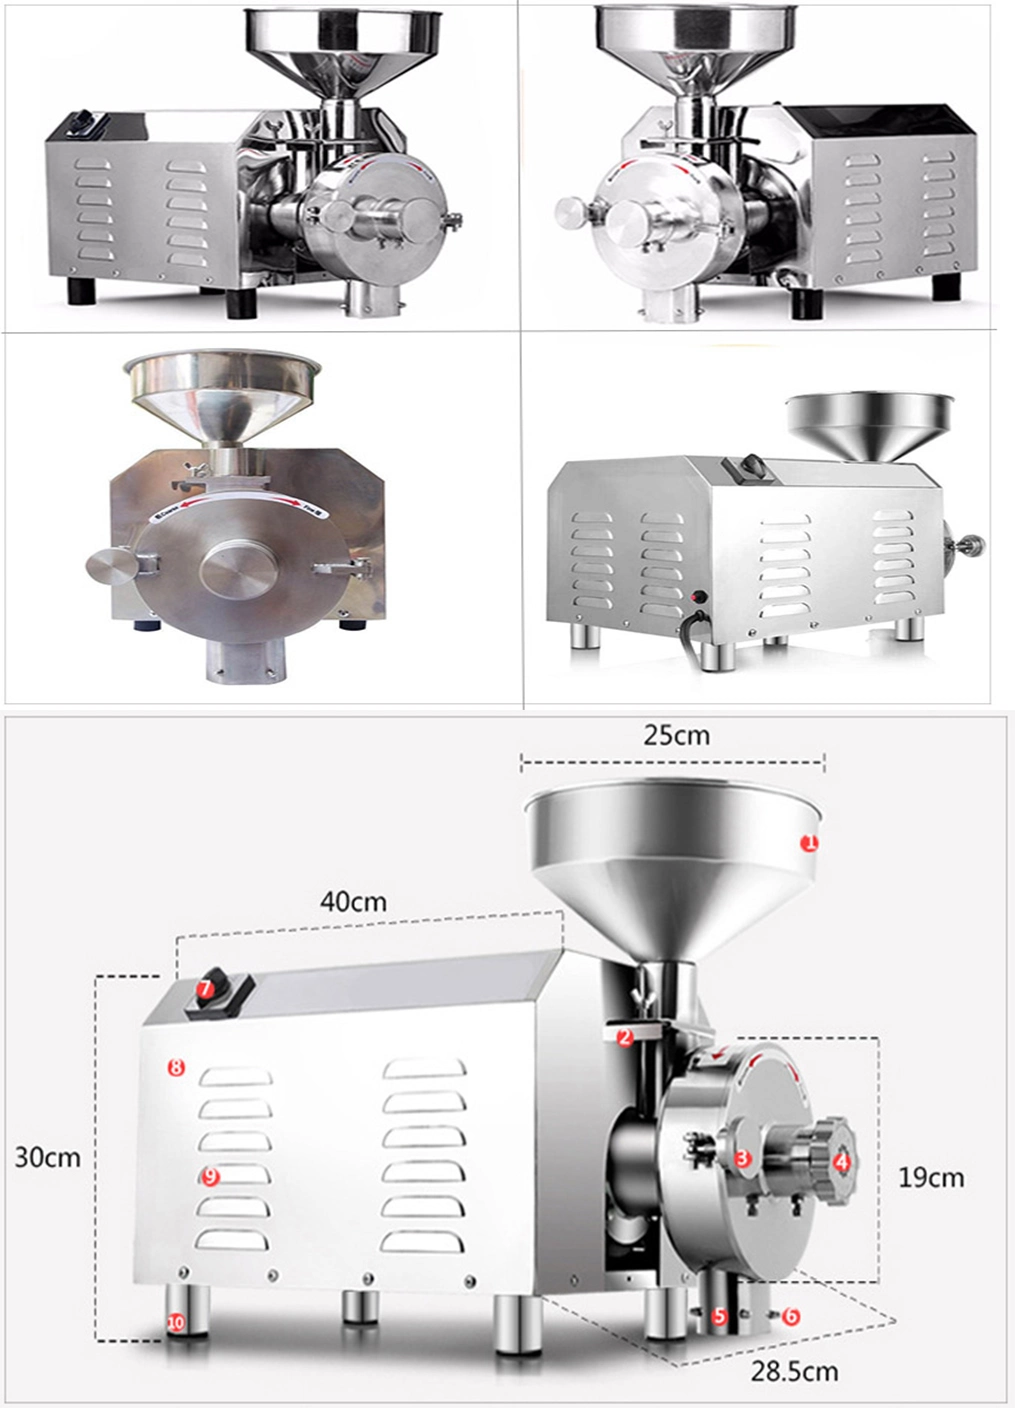 Commercial Grain Grinder Machinery Used Flour Mills/Flour Mill Used for Sale/Industrial Grain Grinder